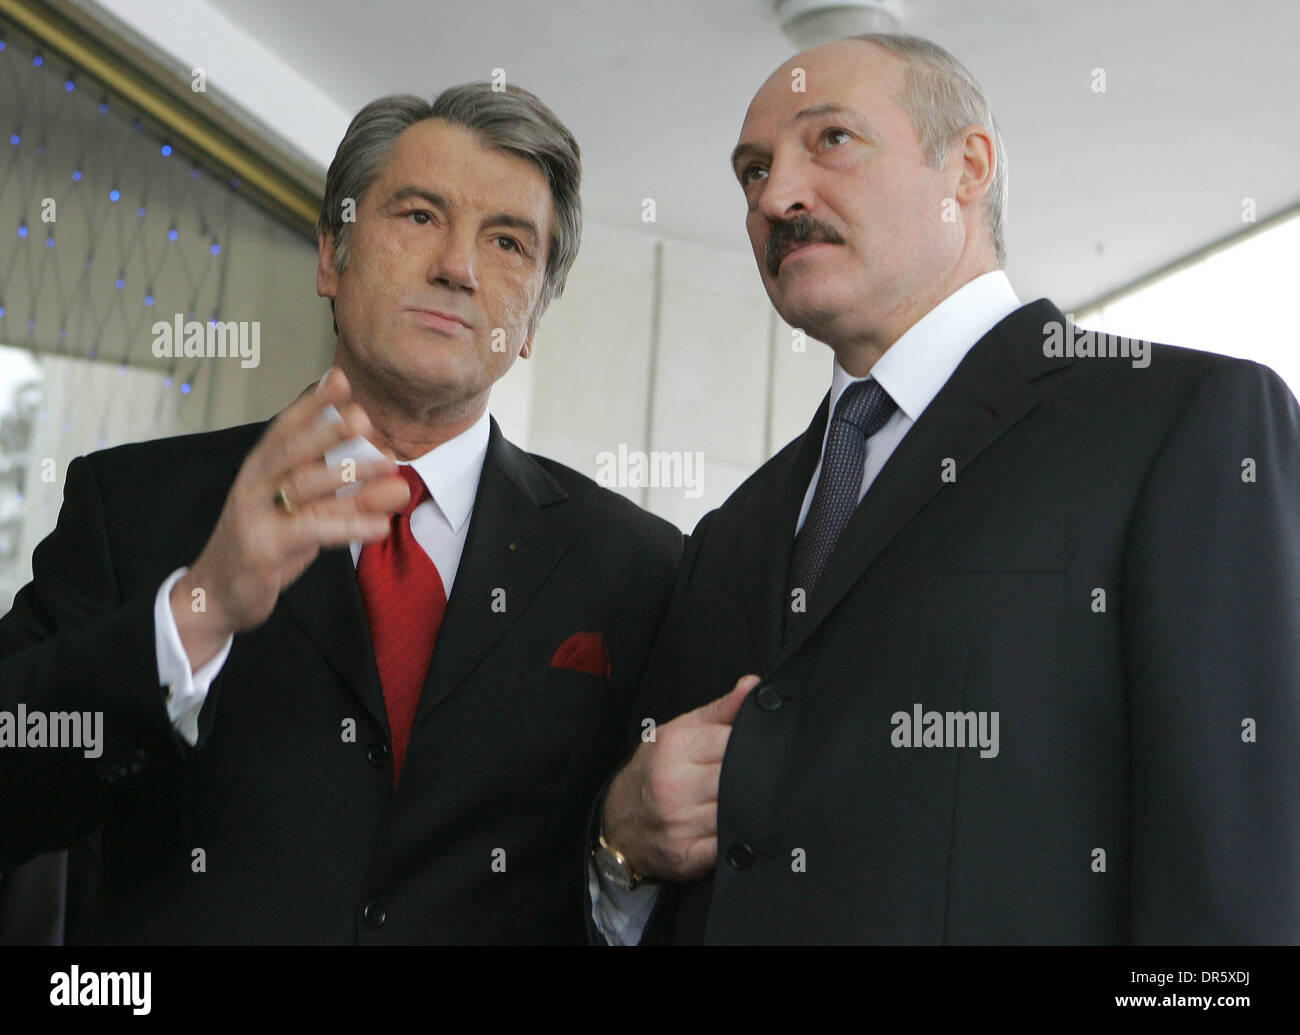 Jan 20, 2009 - Kiev, Ukraine - President of Belarus ALEXANDER LUKASHENKO, right, visits Ukraine and meets with President of Ukraine VIKTOR YUSHCHENKO, left. (Credit Image: © PhotoXpress/ZUMA Press) RESTRICTIONS: * North and South America Rights Only * Stock Photo